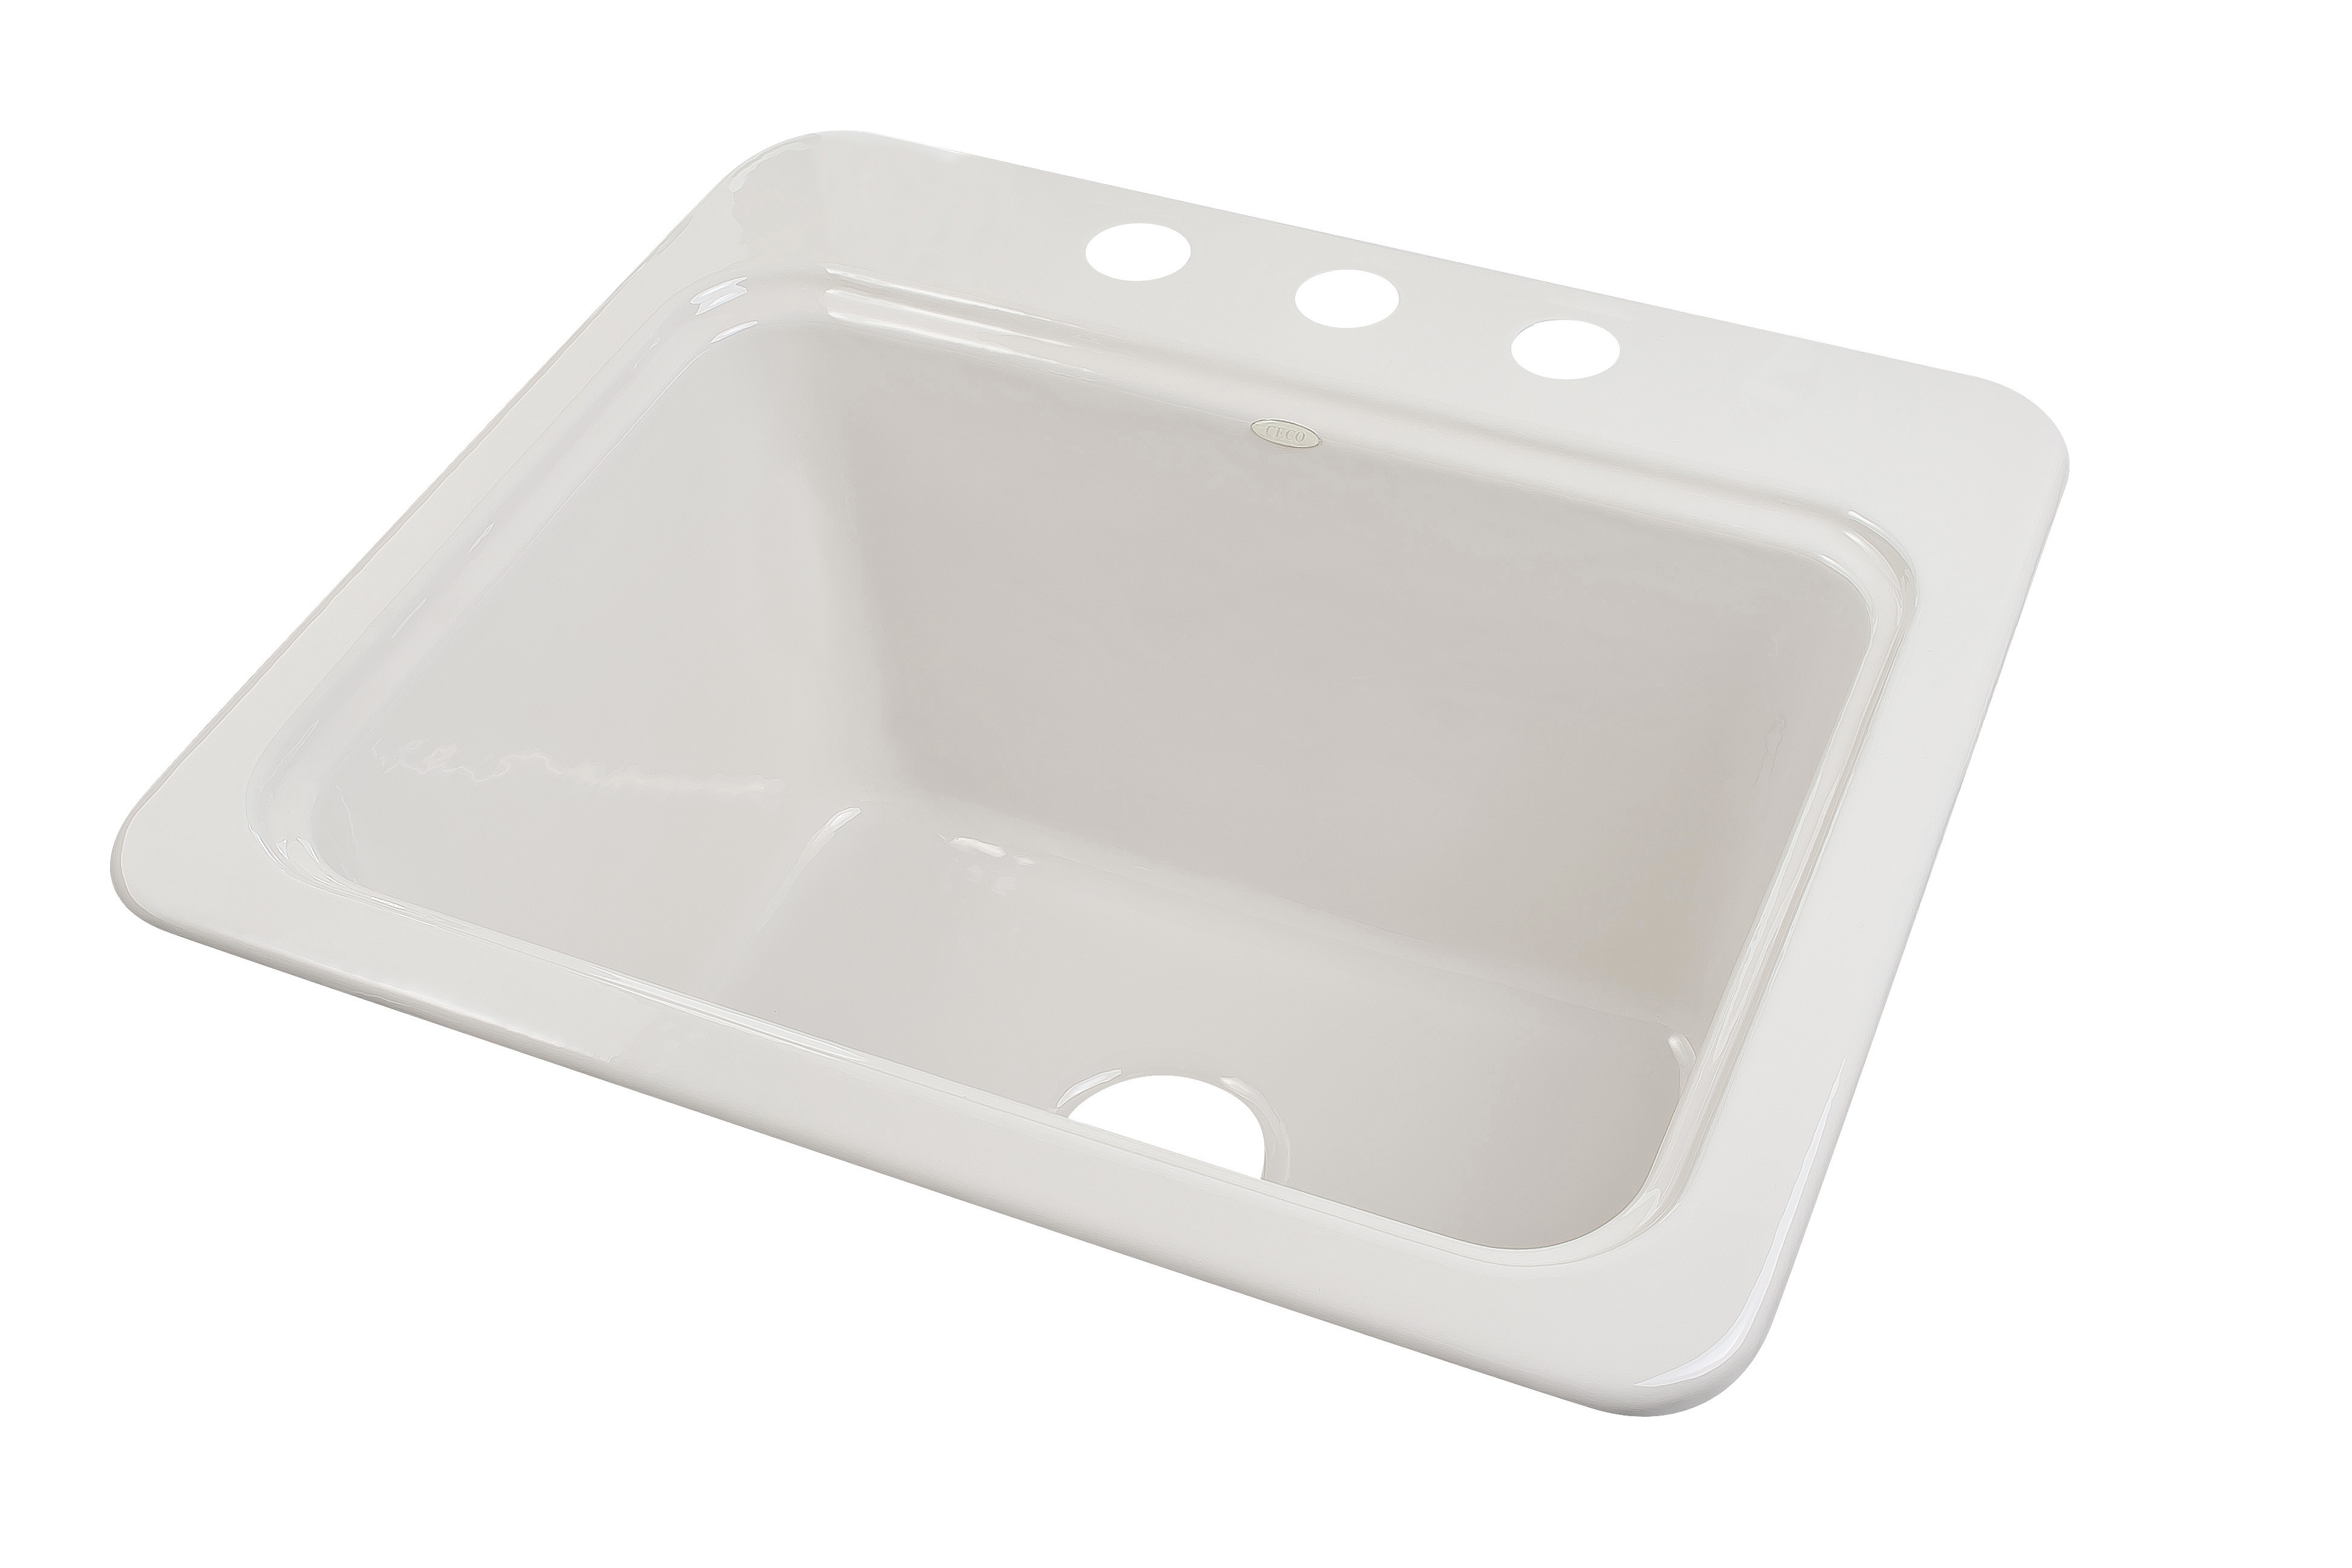 Almond CECO 857-3 Designer Cast Iron Laundry Sink 25'' x 22'' with Extra Deep Bowl